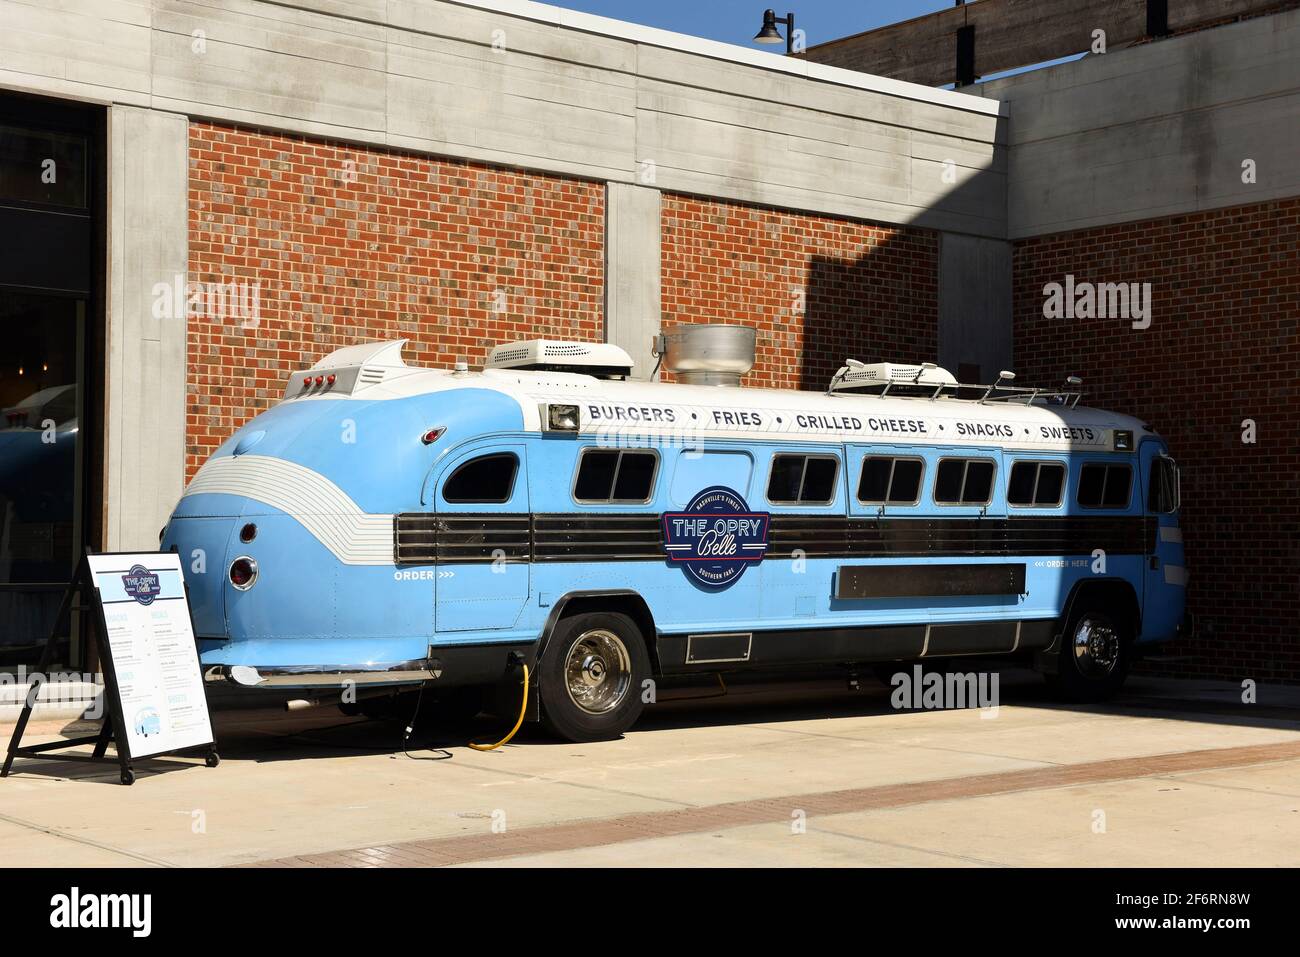 Nashville, TN, USA - September 22, 2019: The Opry Belle food bus parked outside the Grand Ole Opry House, is a fully functional mobile kitchen that wa Stock Photo